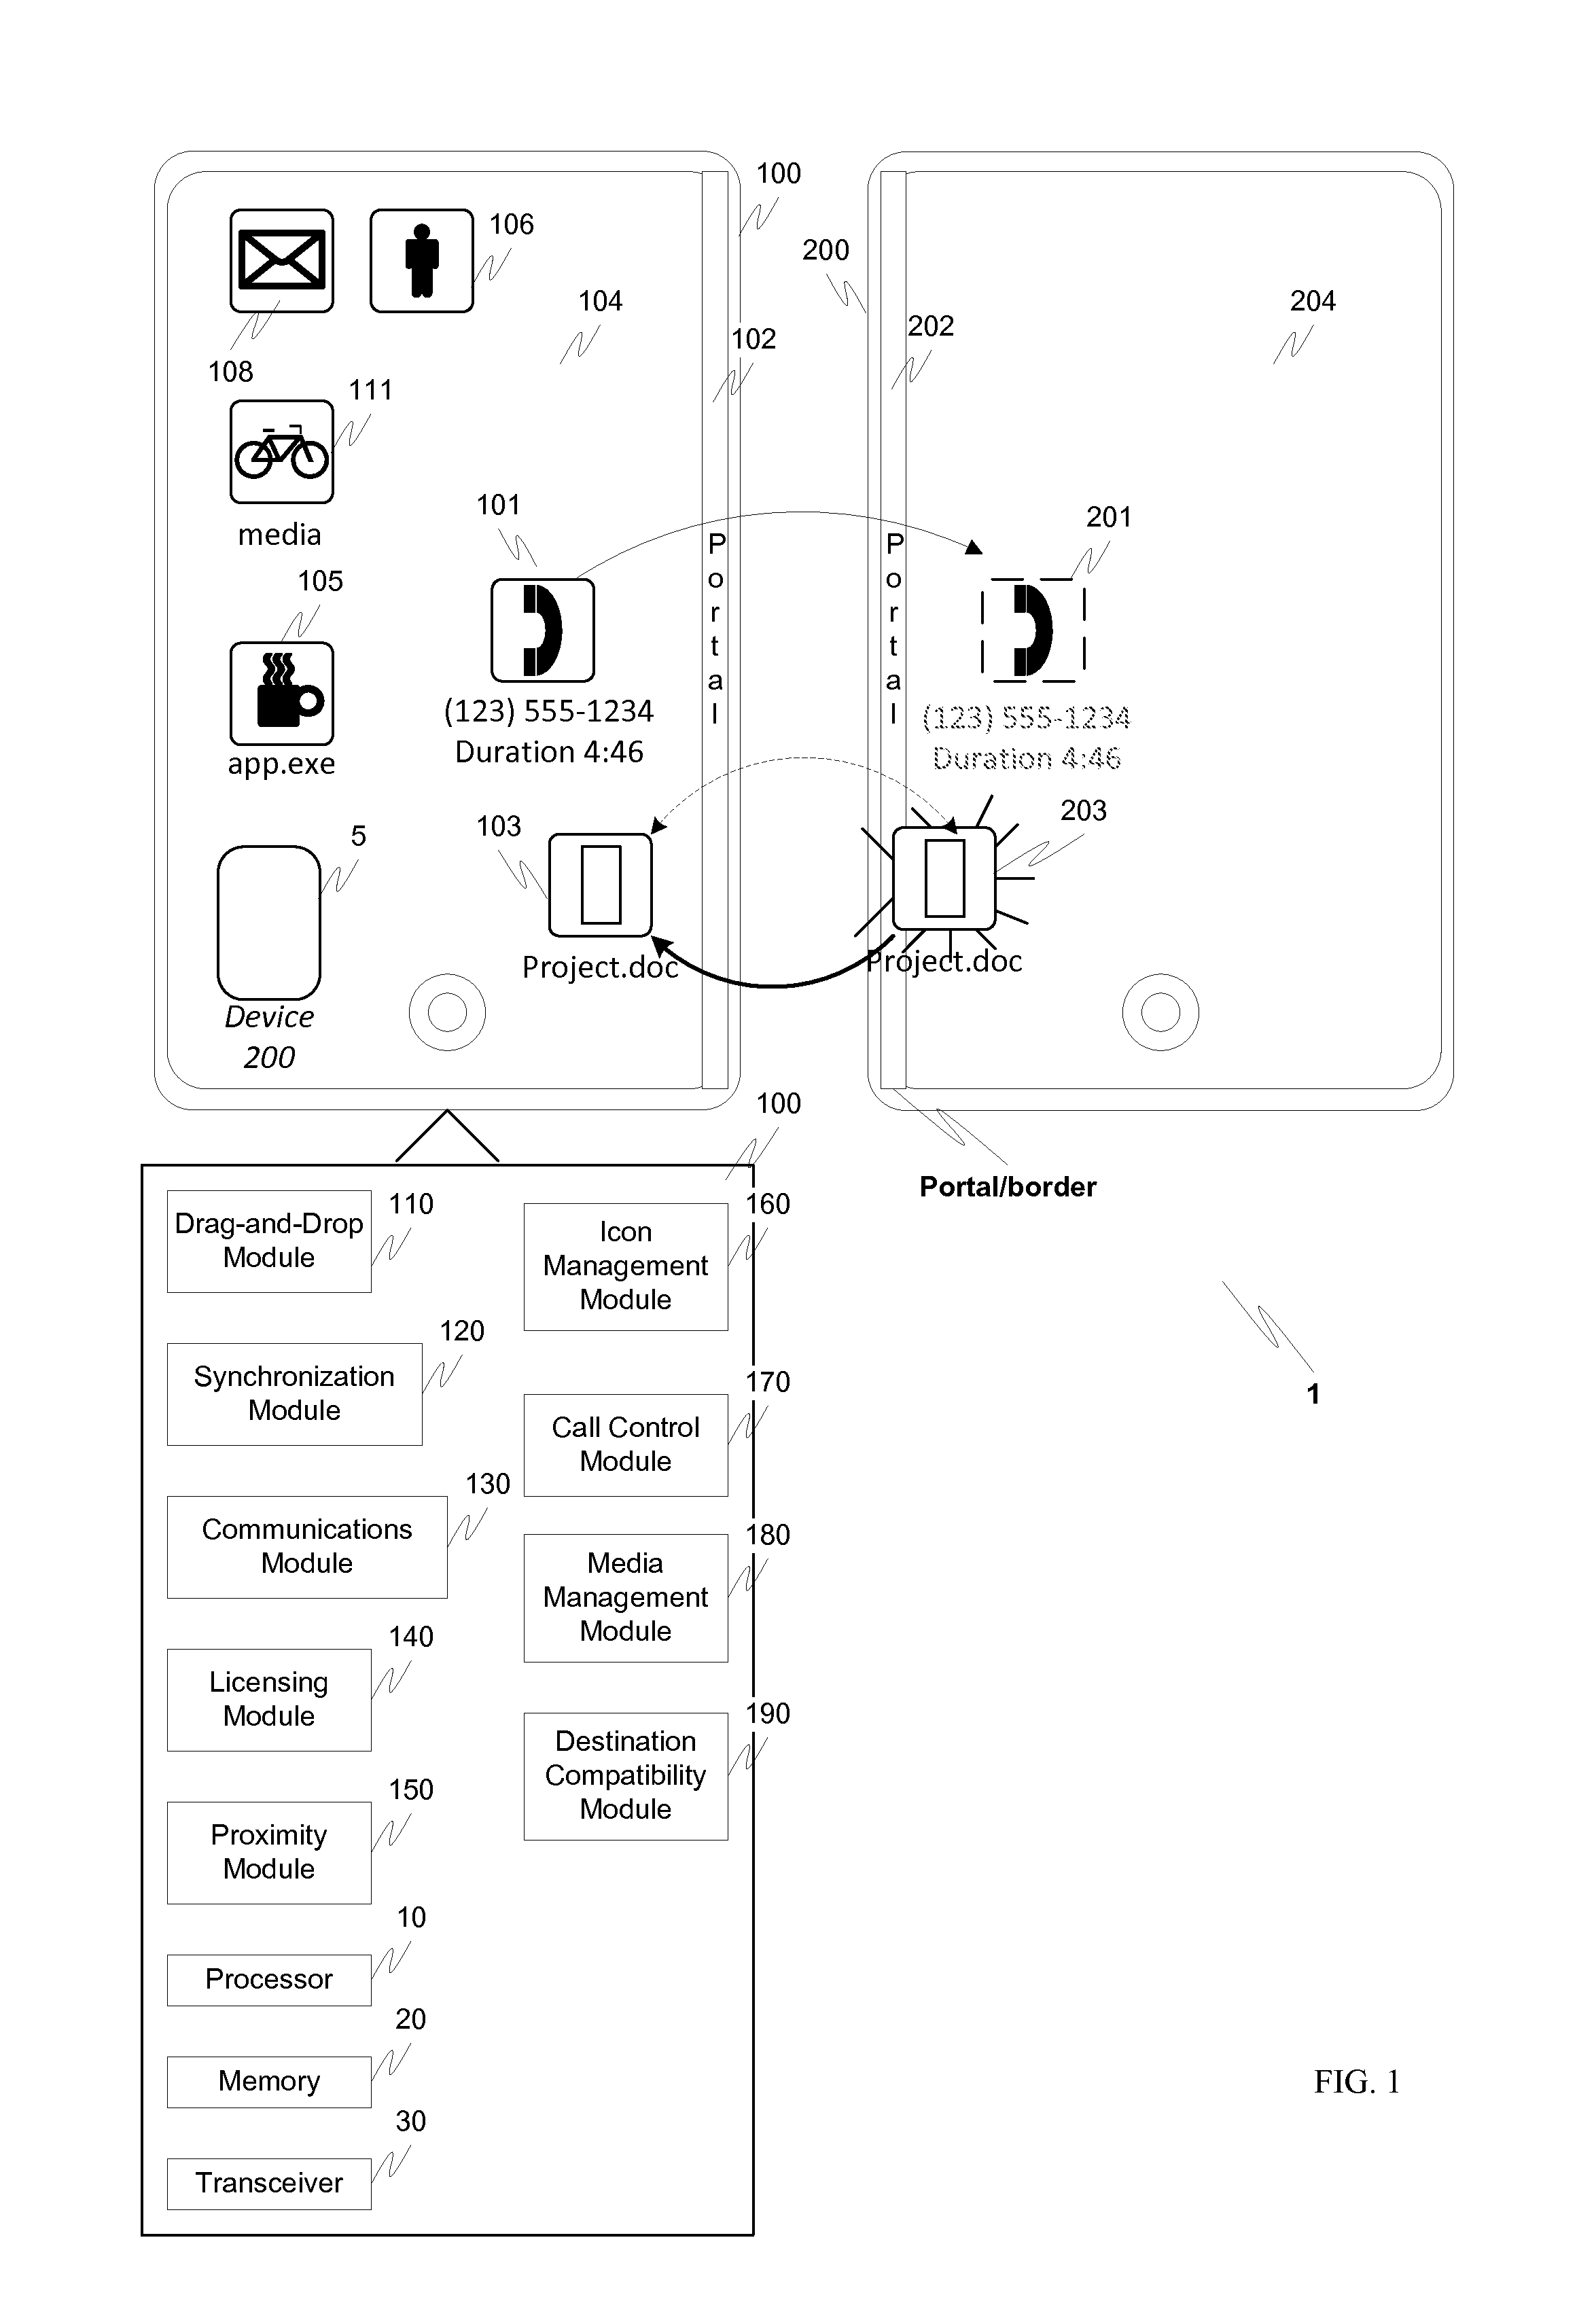 Method and apparatus for allowing drag-and-drop operations across the shared borders of adjacent touch screen-equipped devices